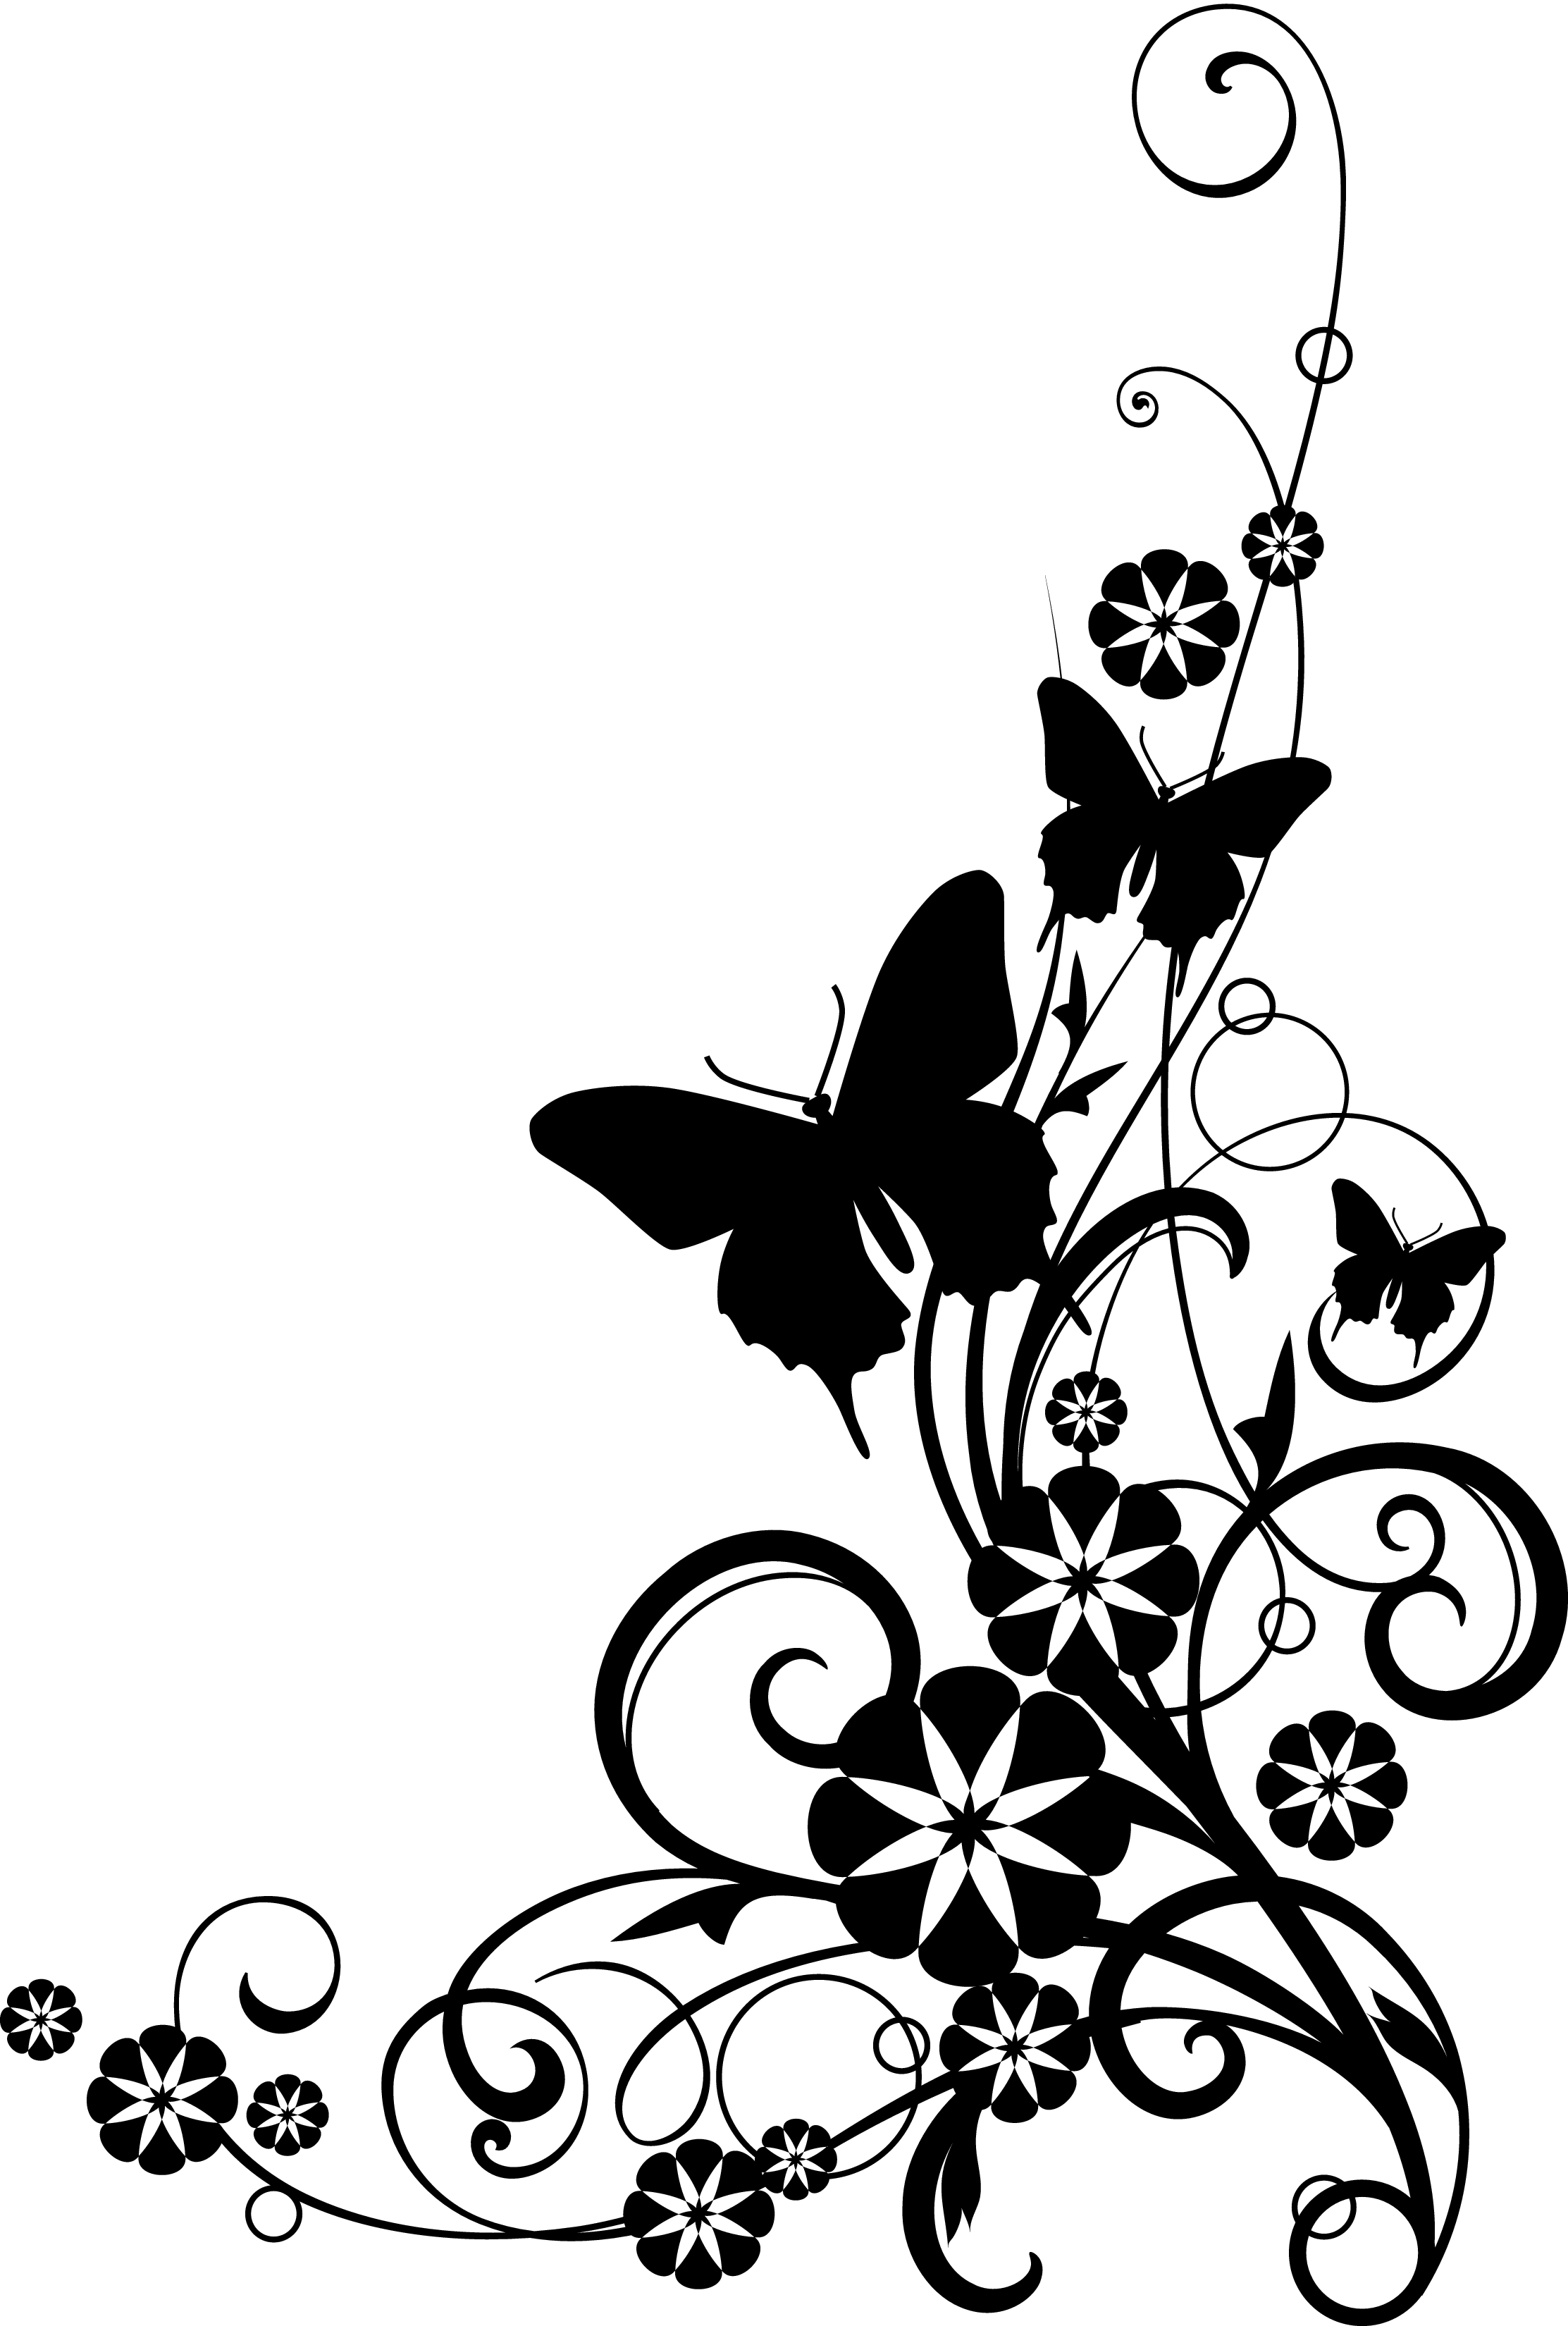 Flower Border Clip Art Black And White Hd Images 3 HD Wallpapers ...